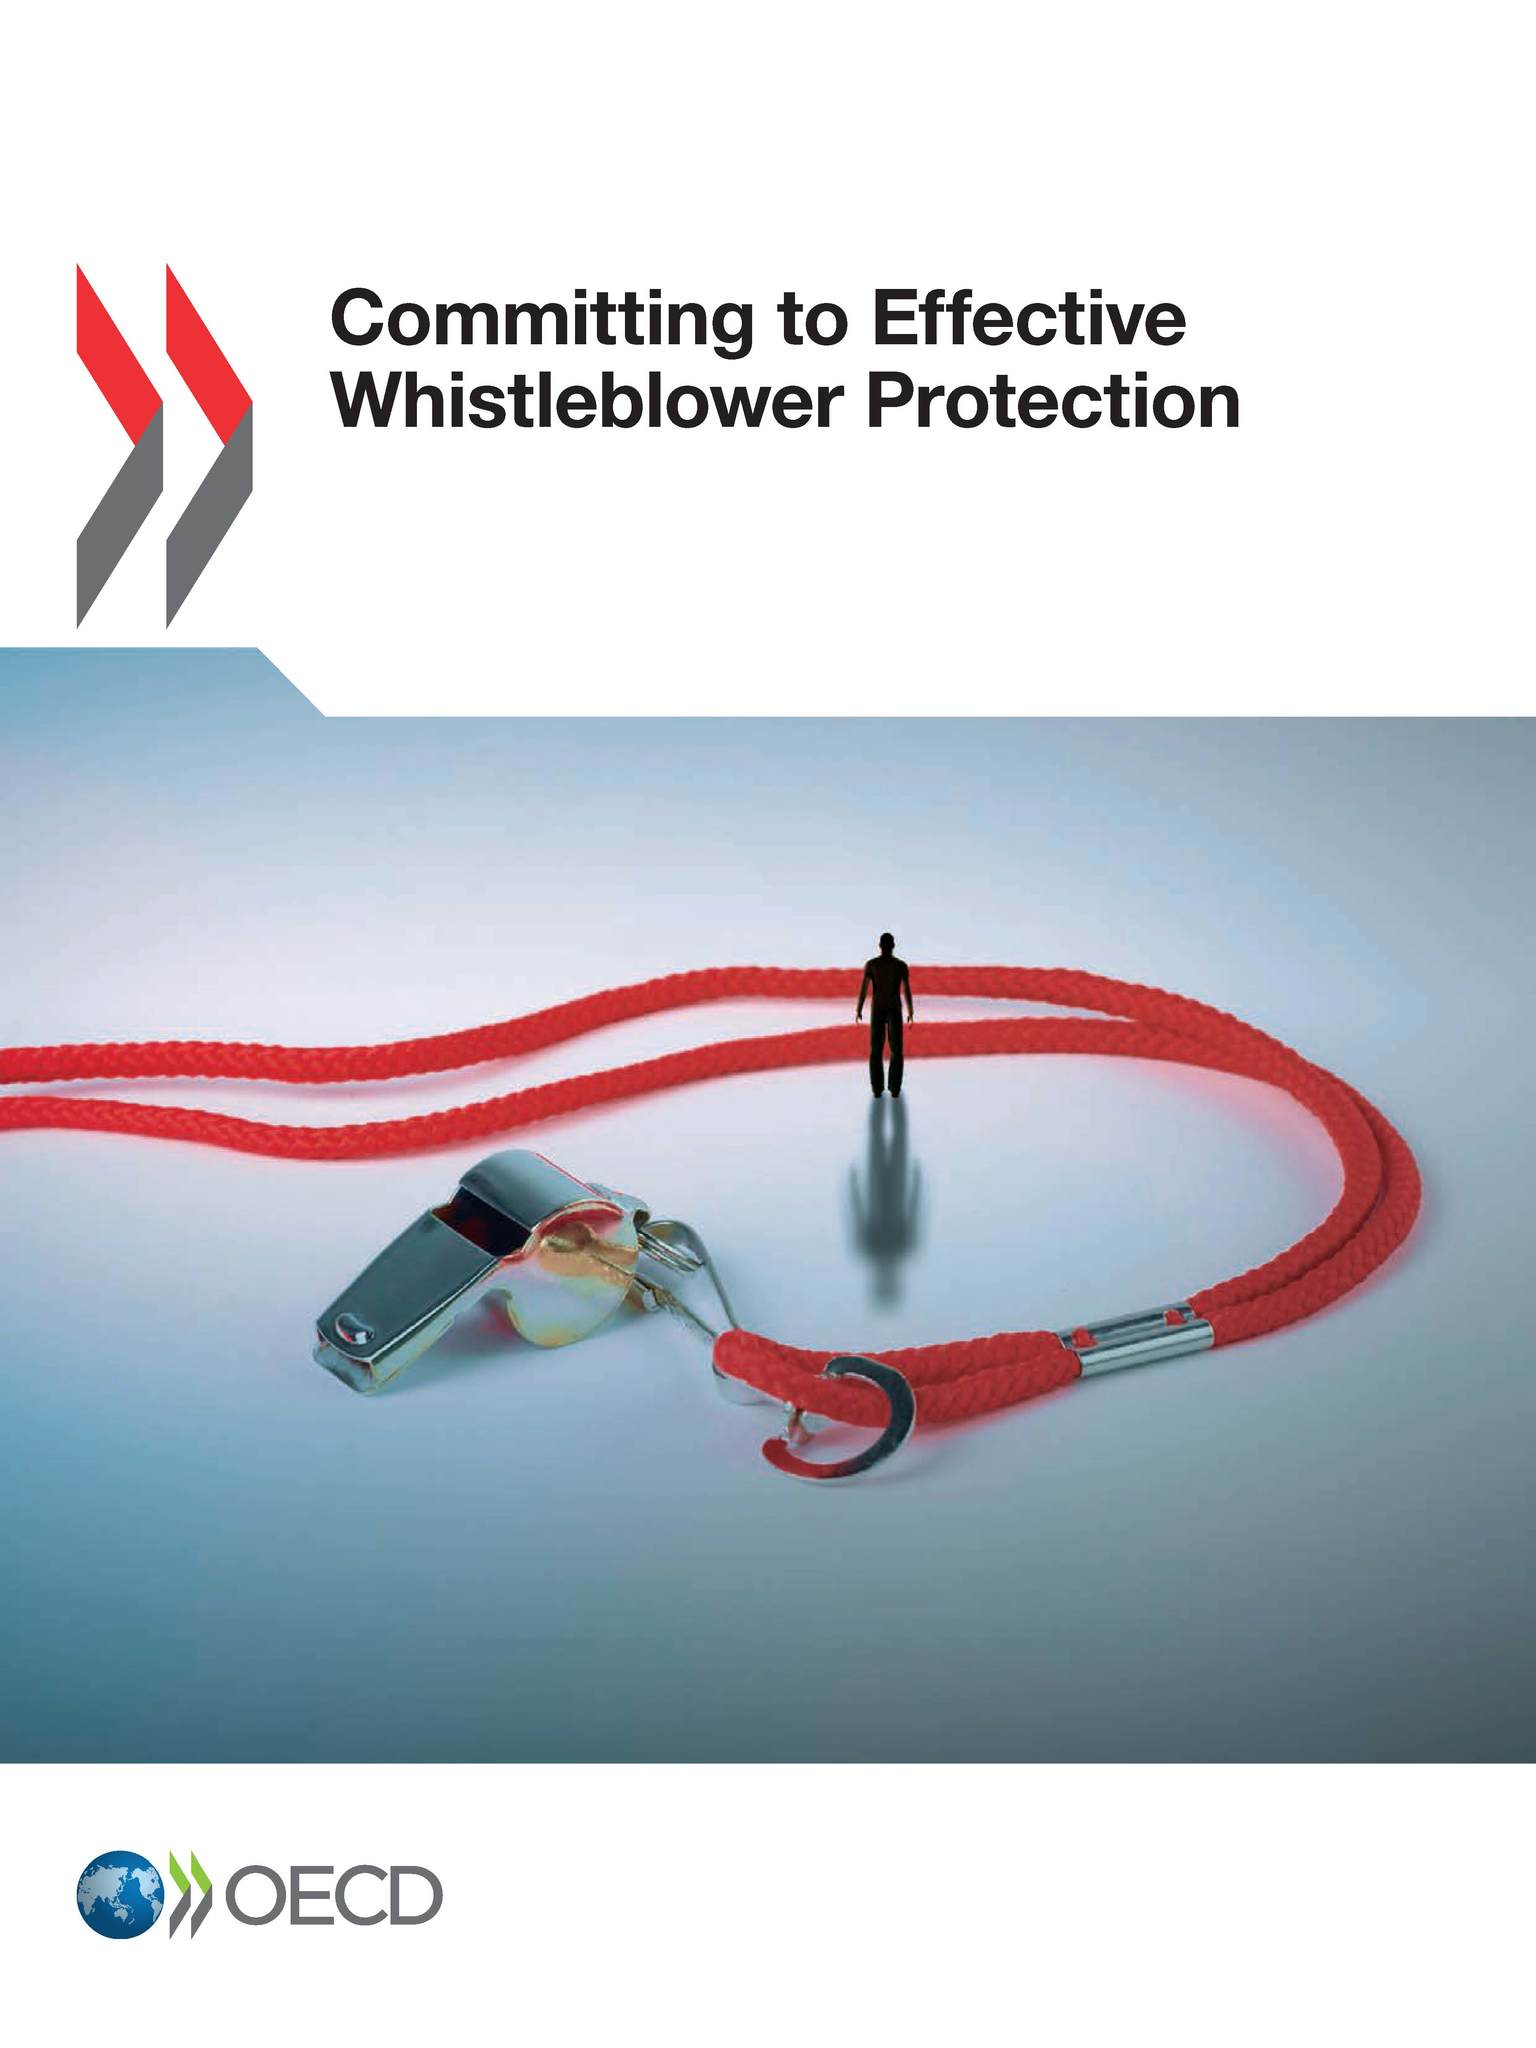 Committing to effective whistleblower protection